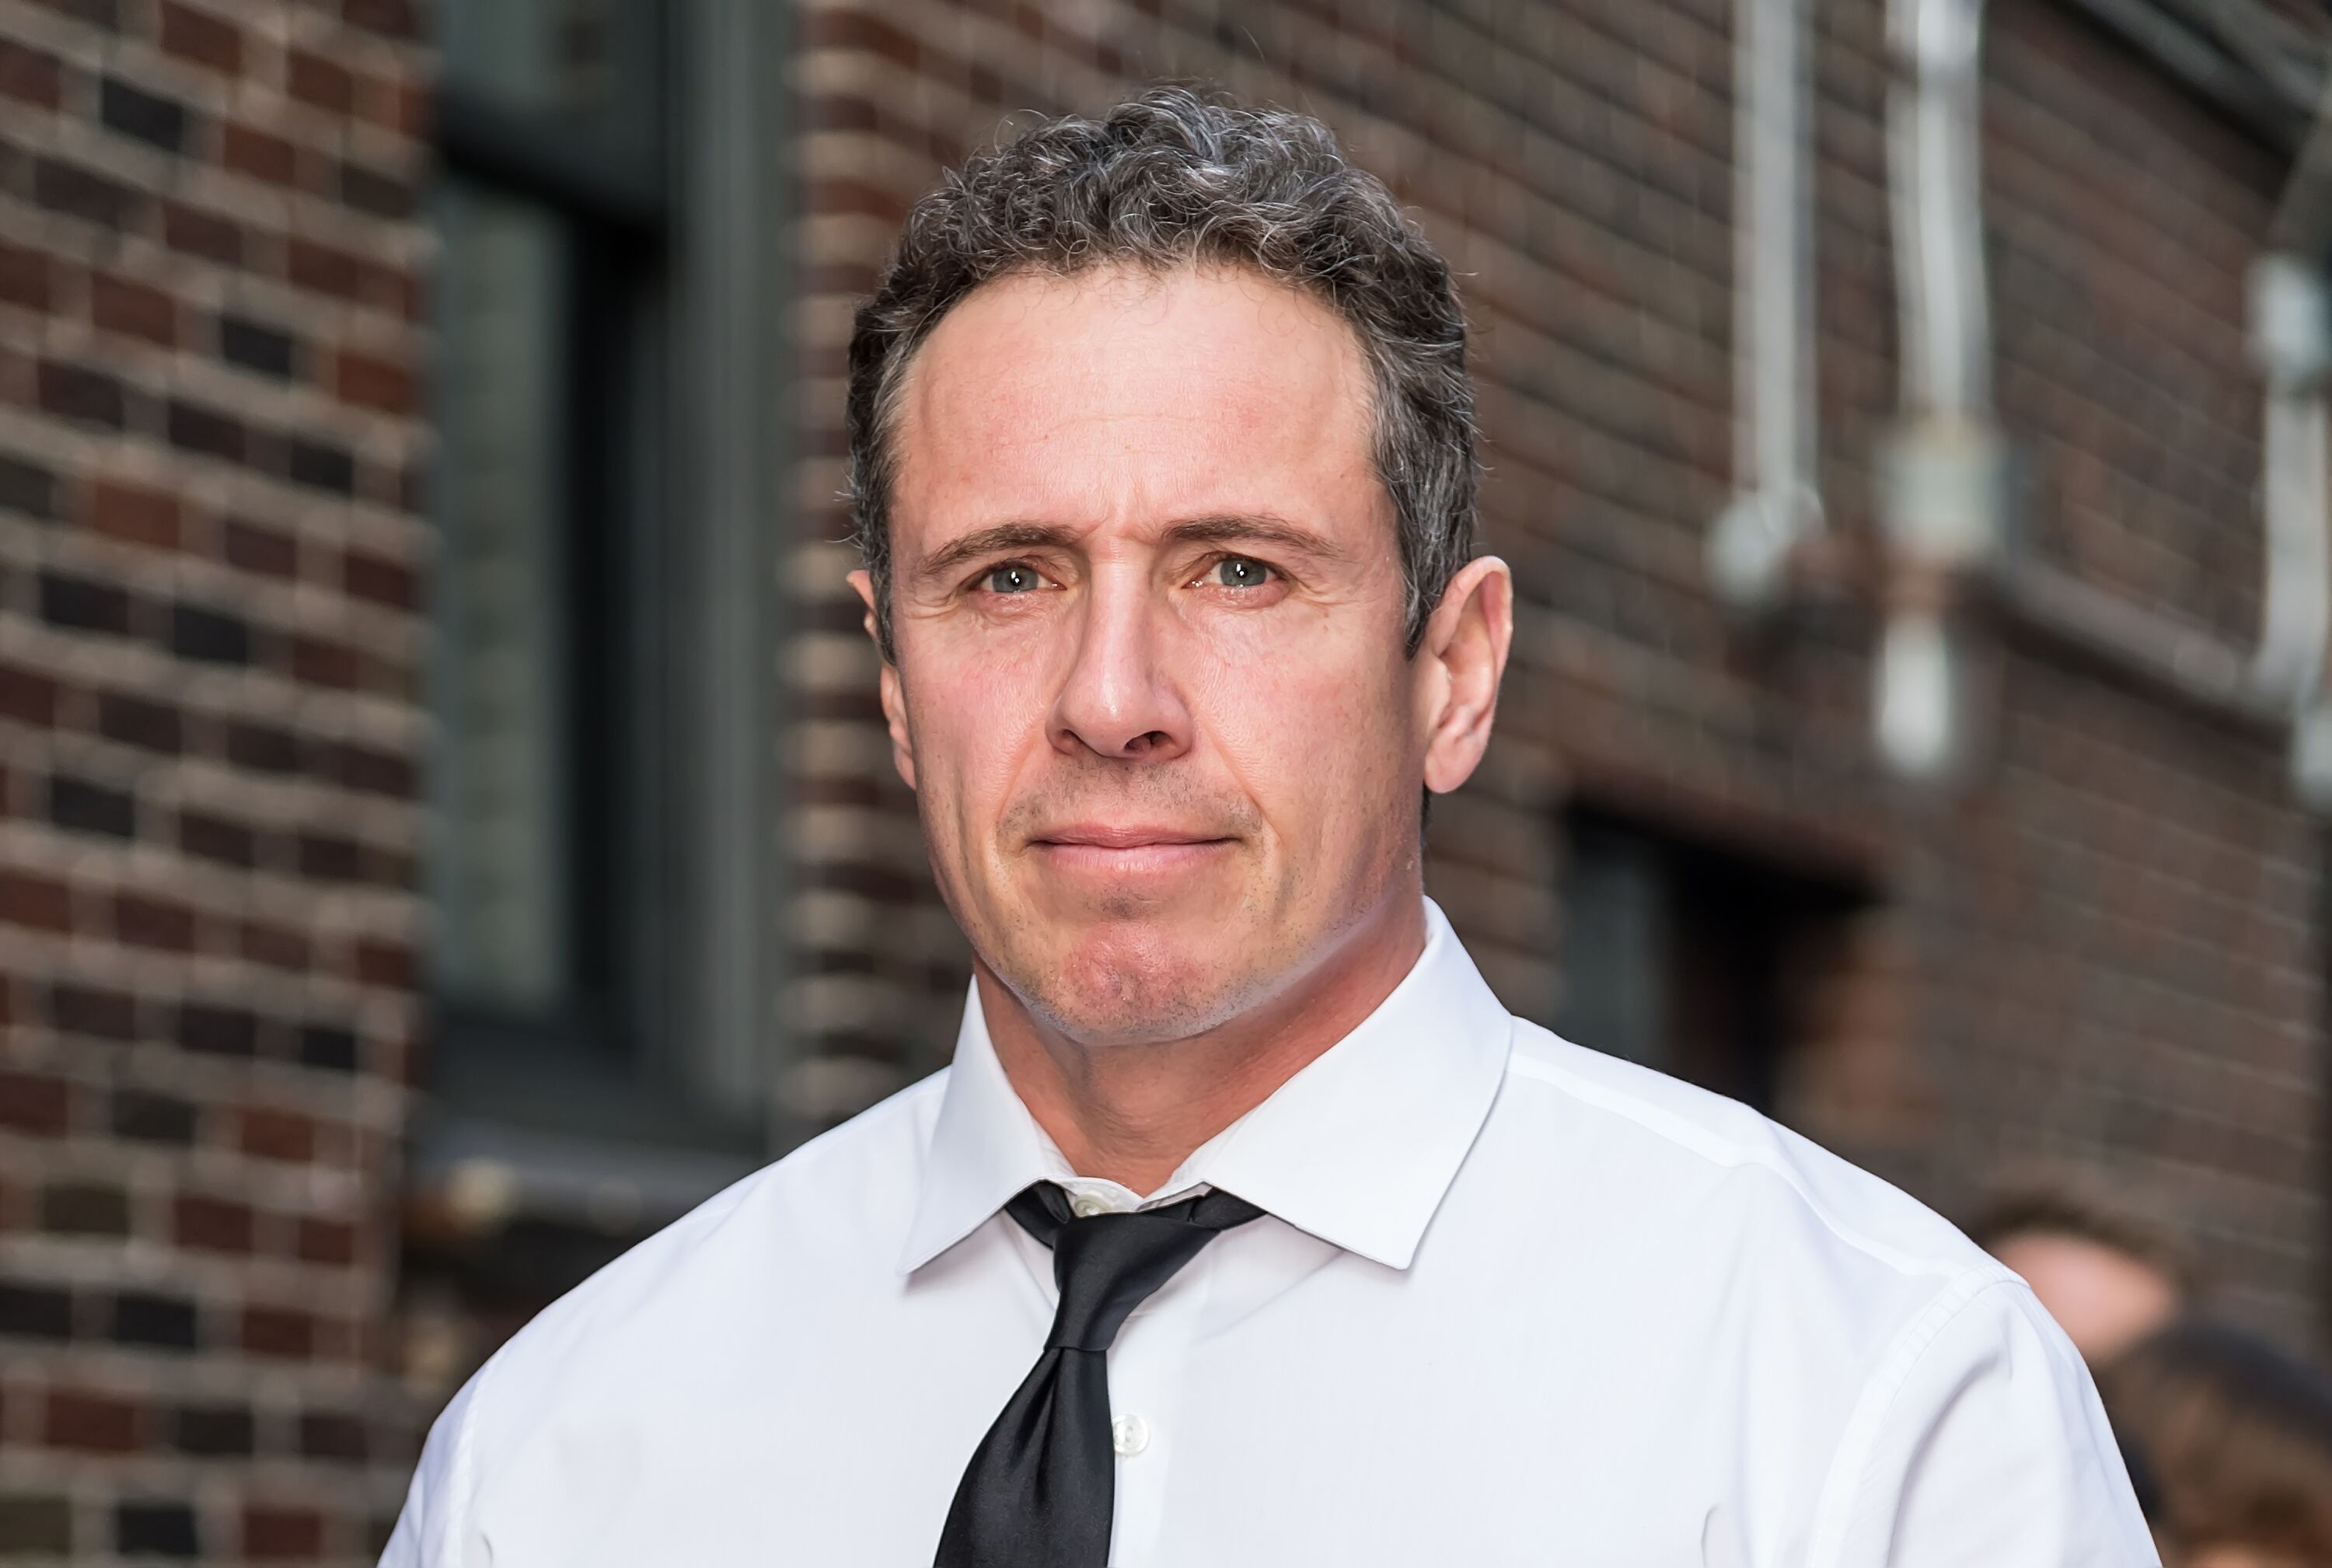 Chris Cuomo at "The Late Show With Stephen Colbert" held at the Ed Sullivan Theater on May 2, 2019, in New York City | Photo: Gilbert Carrasquillo/GC Images/Getty Images